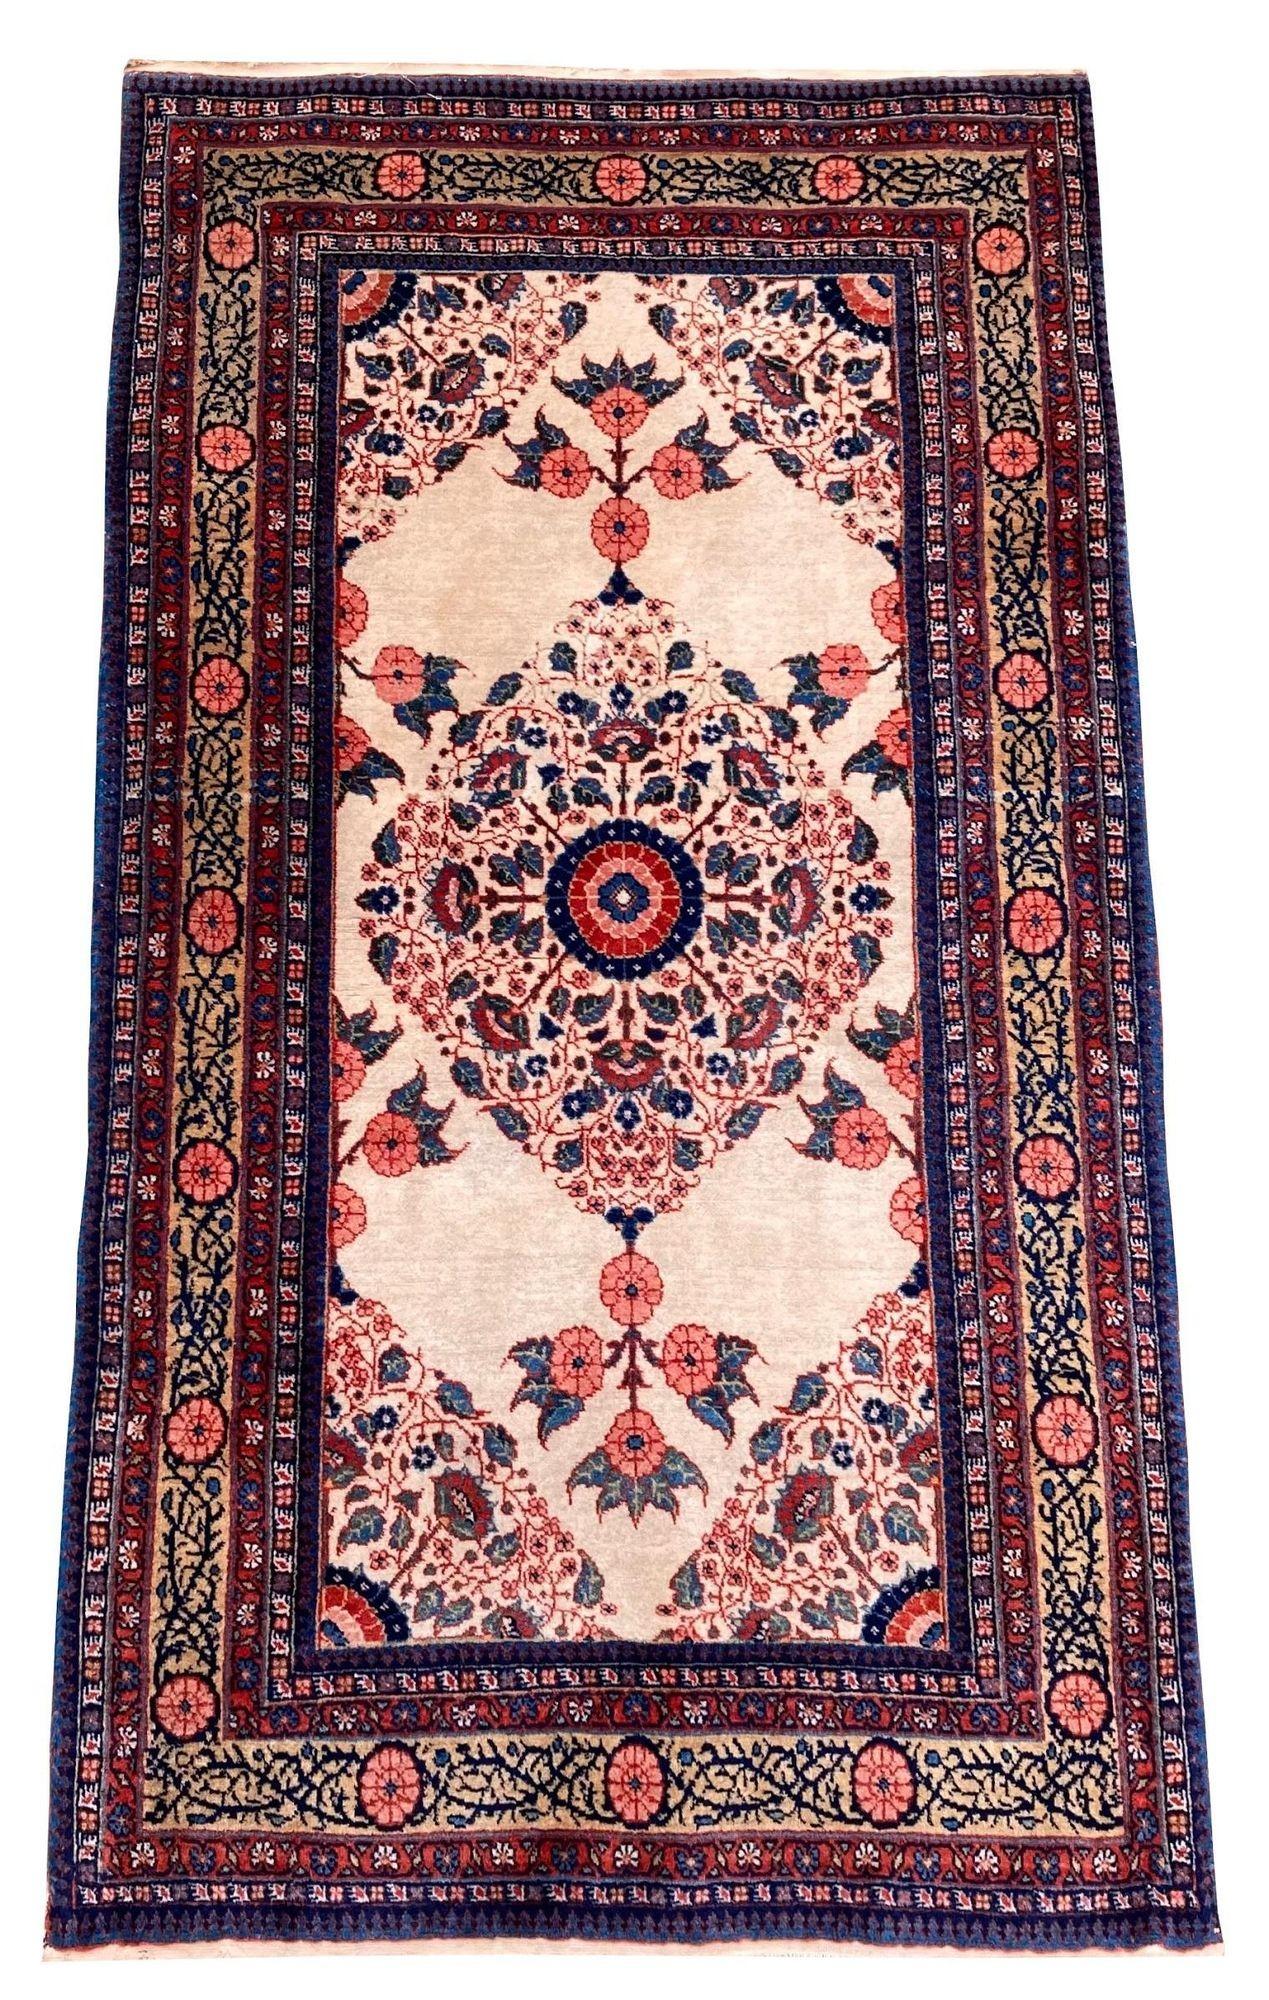 A lovely antique Mashad rug, handwoven circa 1920 with an elegantly drawn floral design on an ivory field and interesting gold border. Very finely woven with lovely wool quality and great secondary colours.
Size: 1.34m x 0.79m (4ft 5in x 2ft